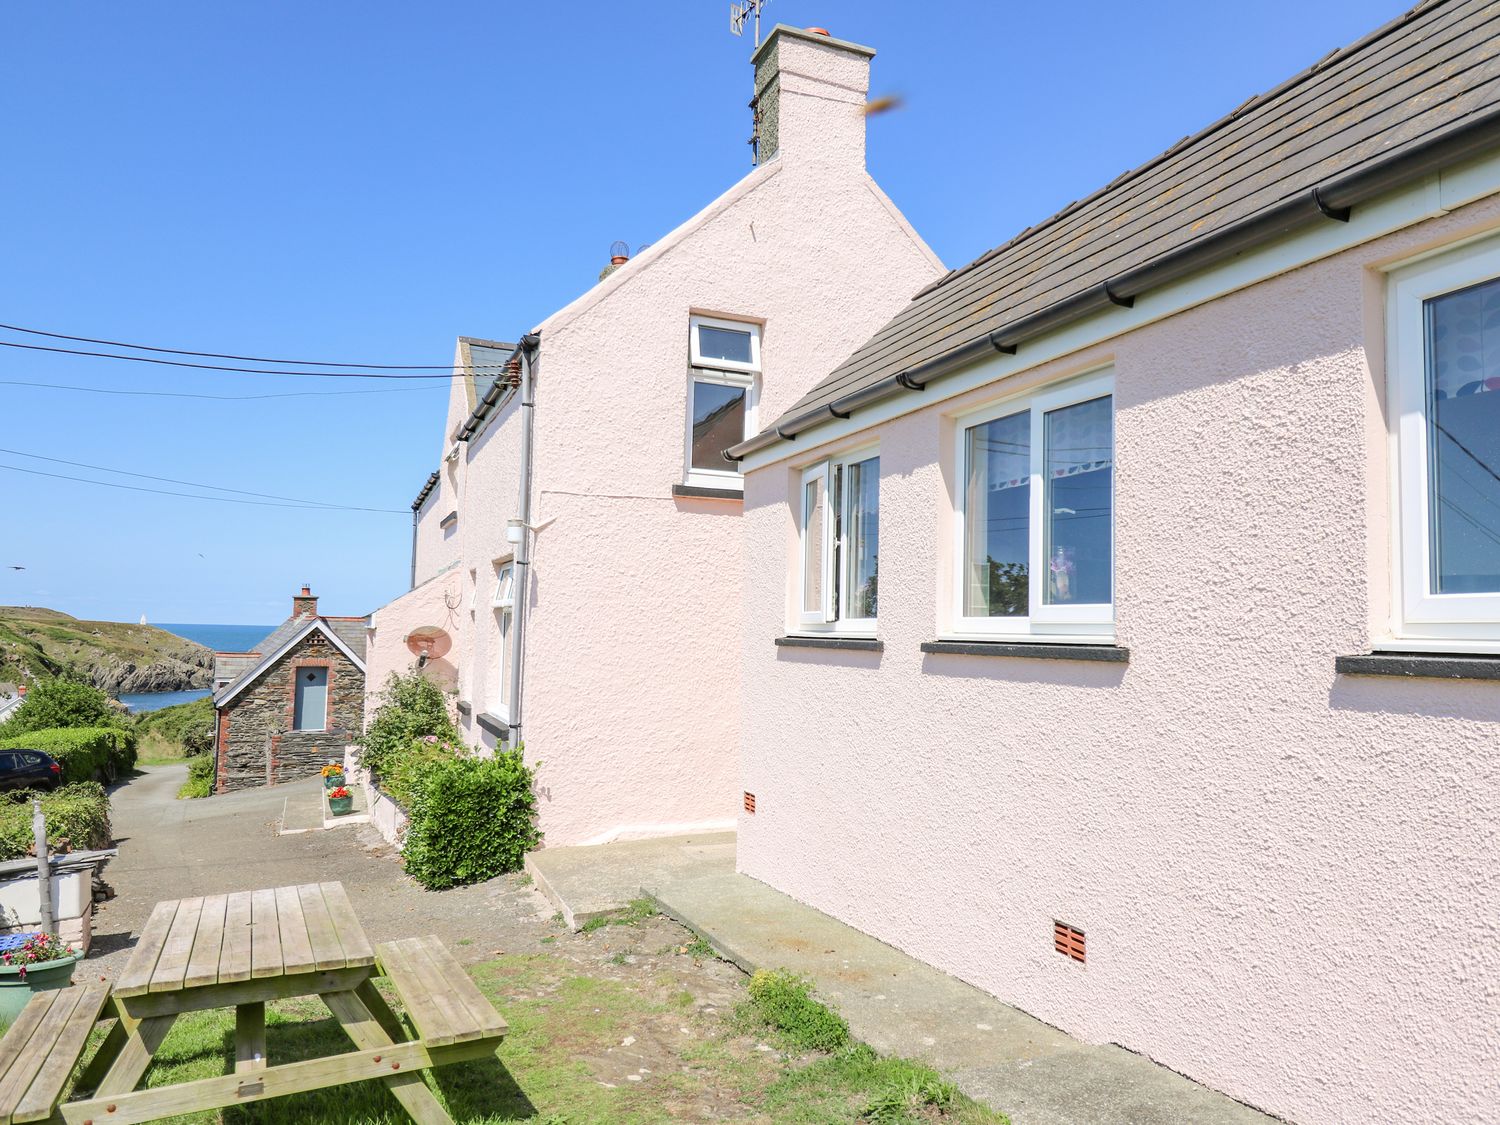 2 Sunny Hill - South Wales - 1124986 - photo 1